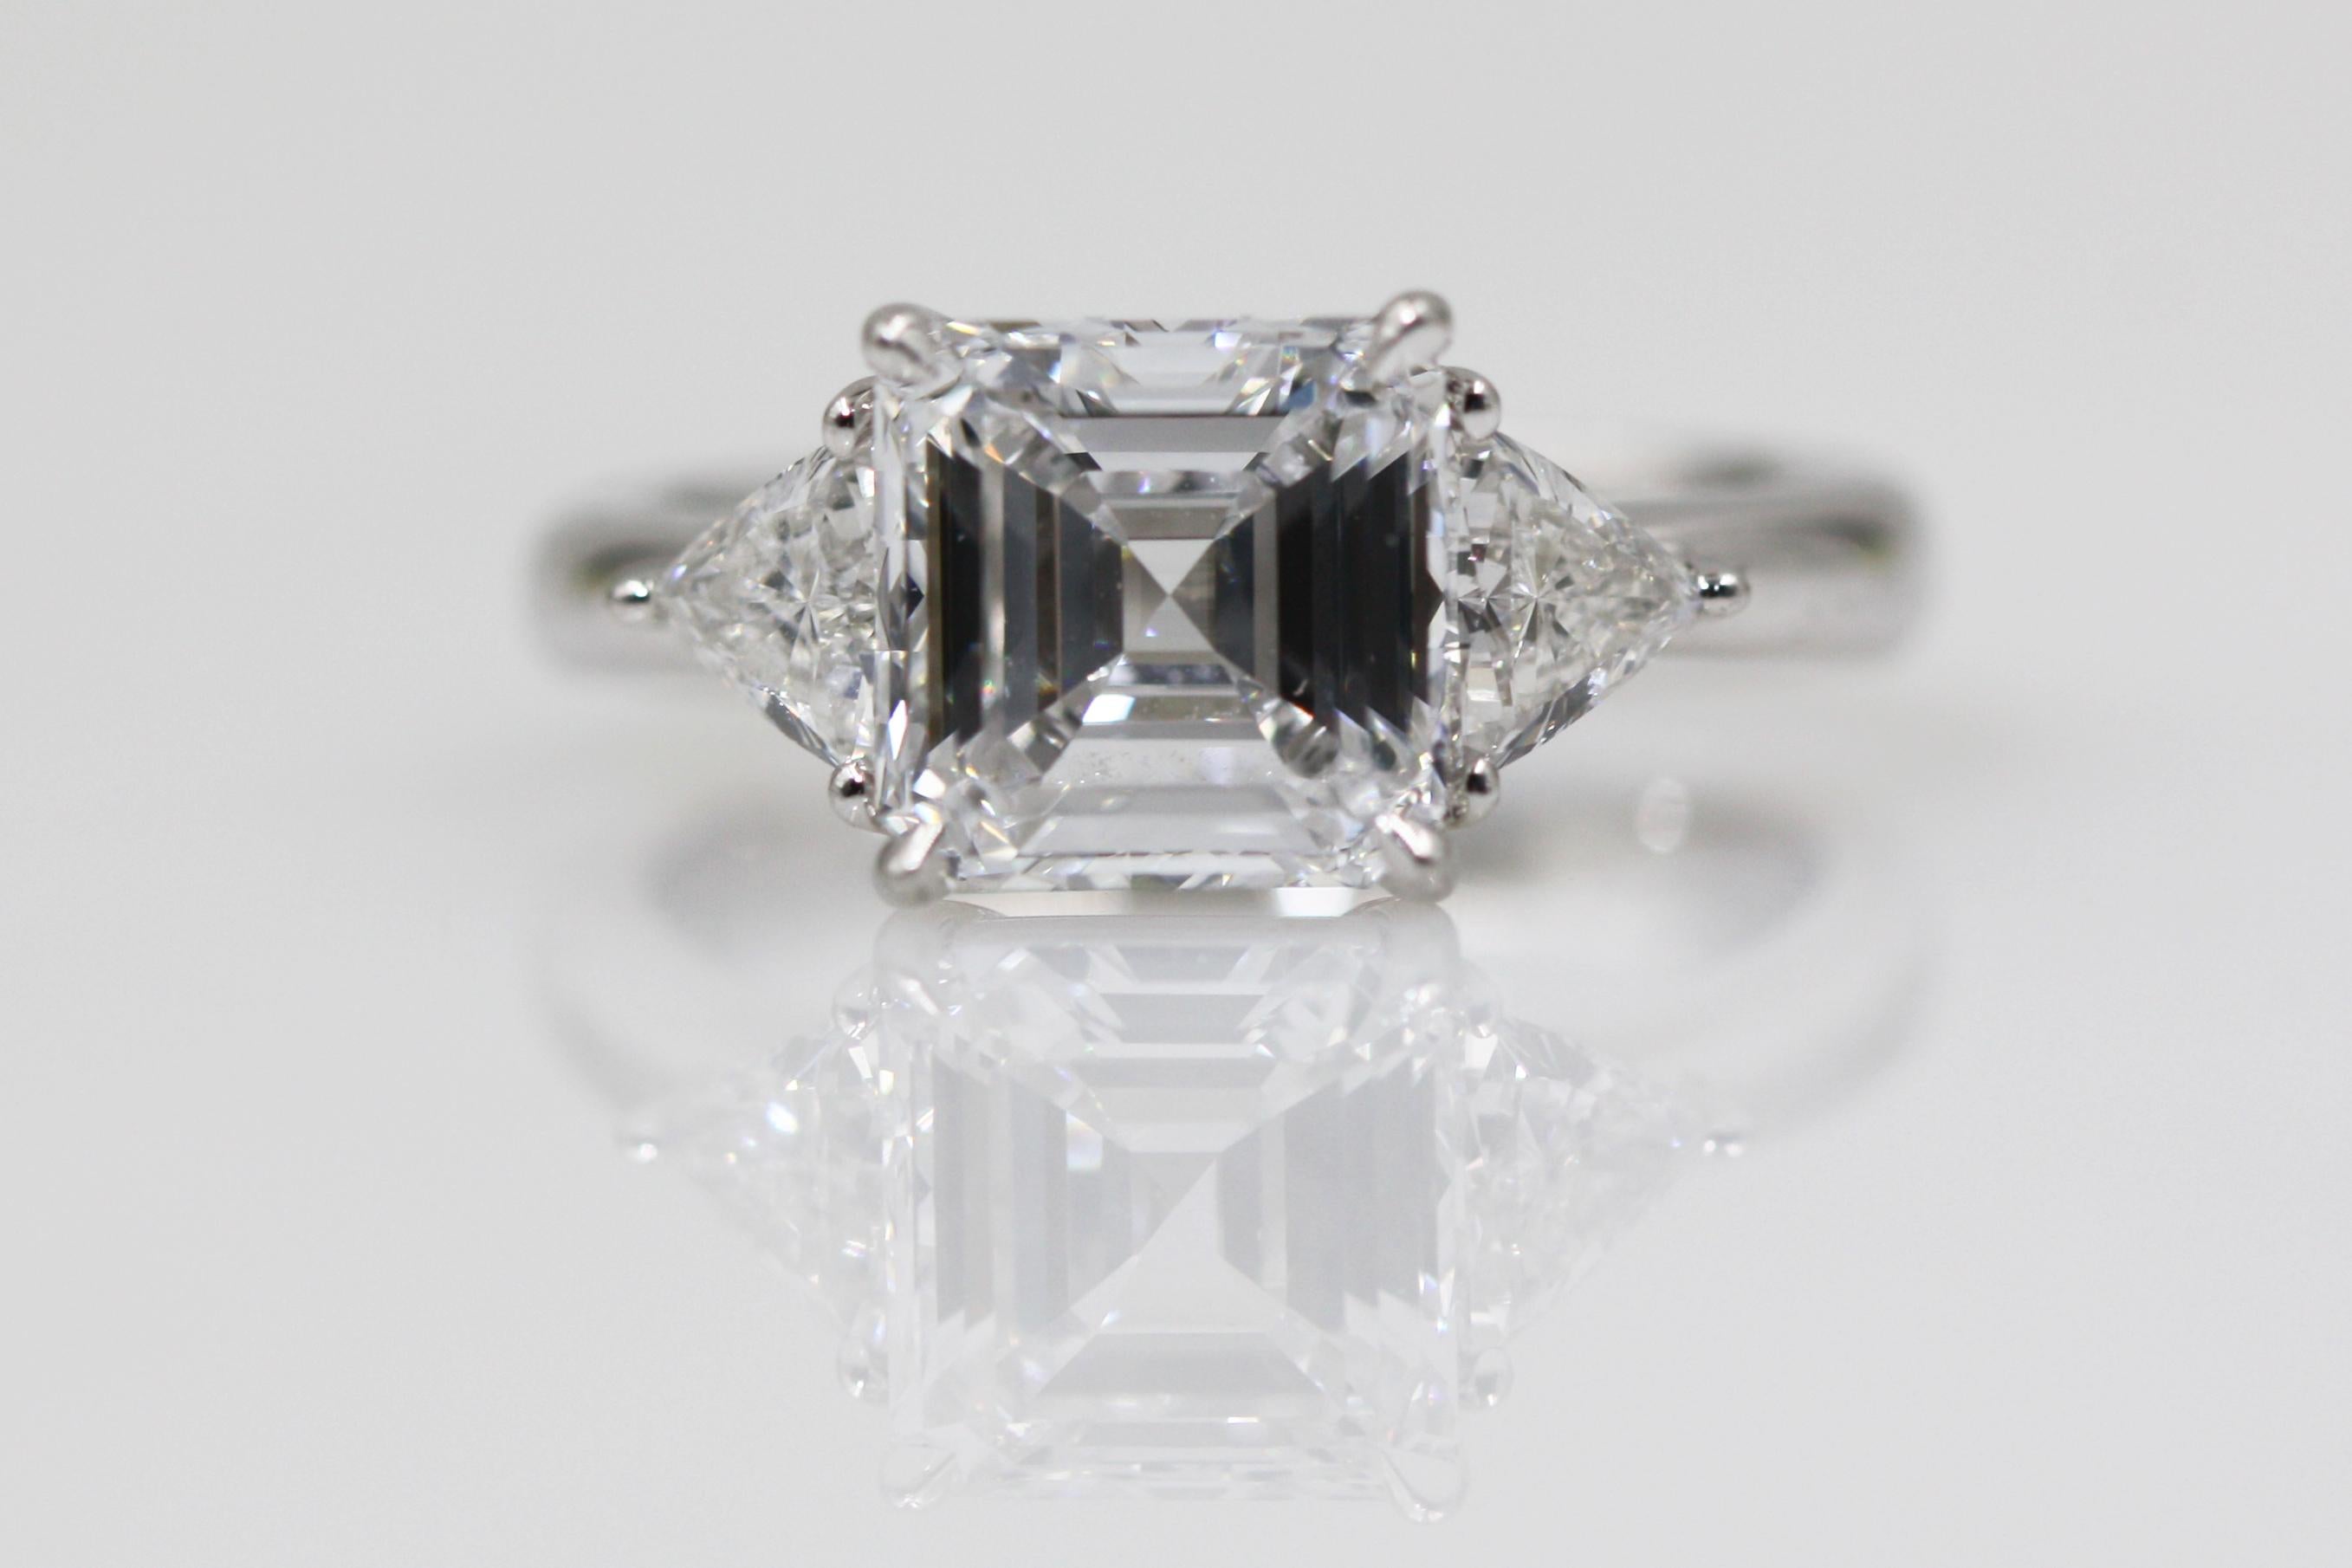 A square emerald-cut engagement ring, 2.27 carats, with trilliant-shaped diamond side stones weighing a total of approximately 0.52 carats, set in platinum. This timeless engagement ring showcasing the natural beauty of rare diamonds and precious